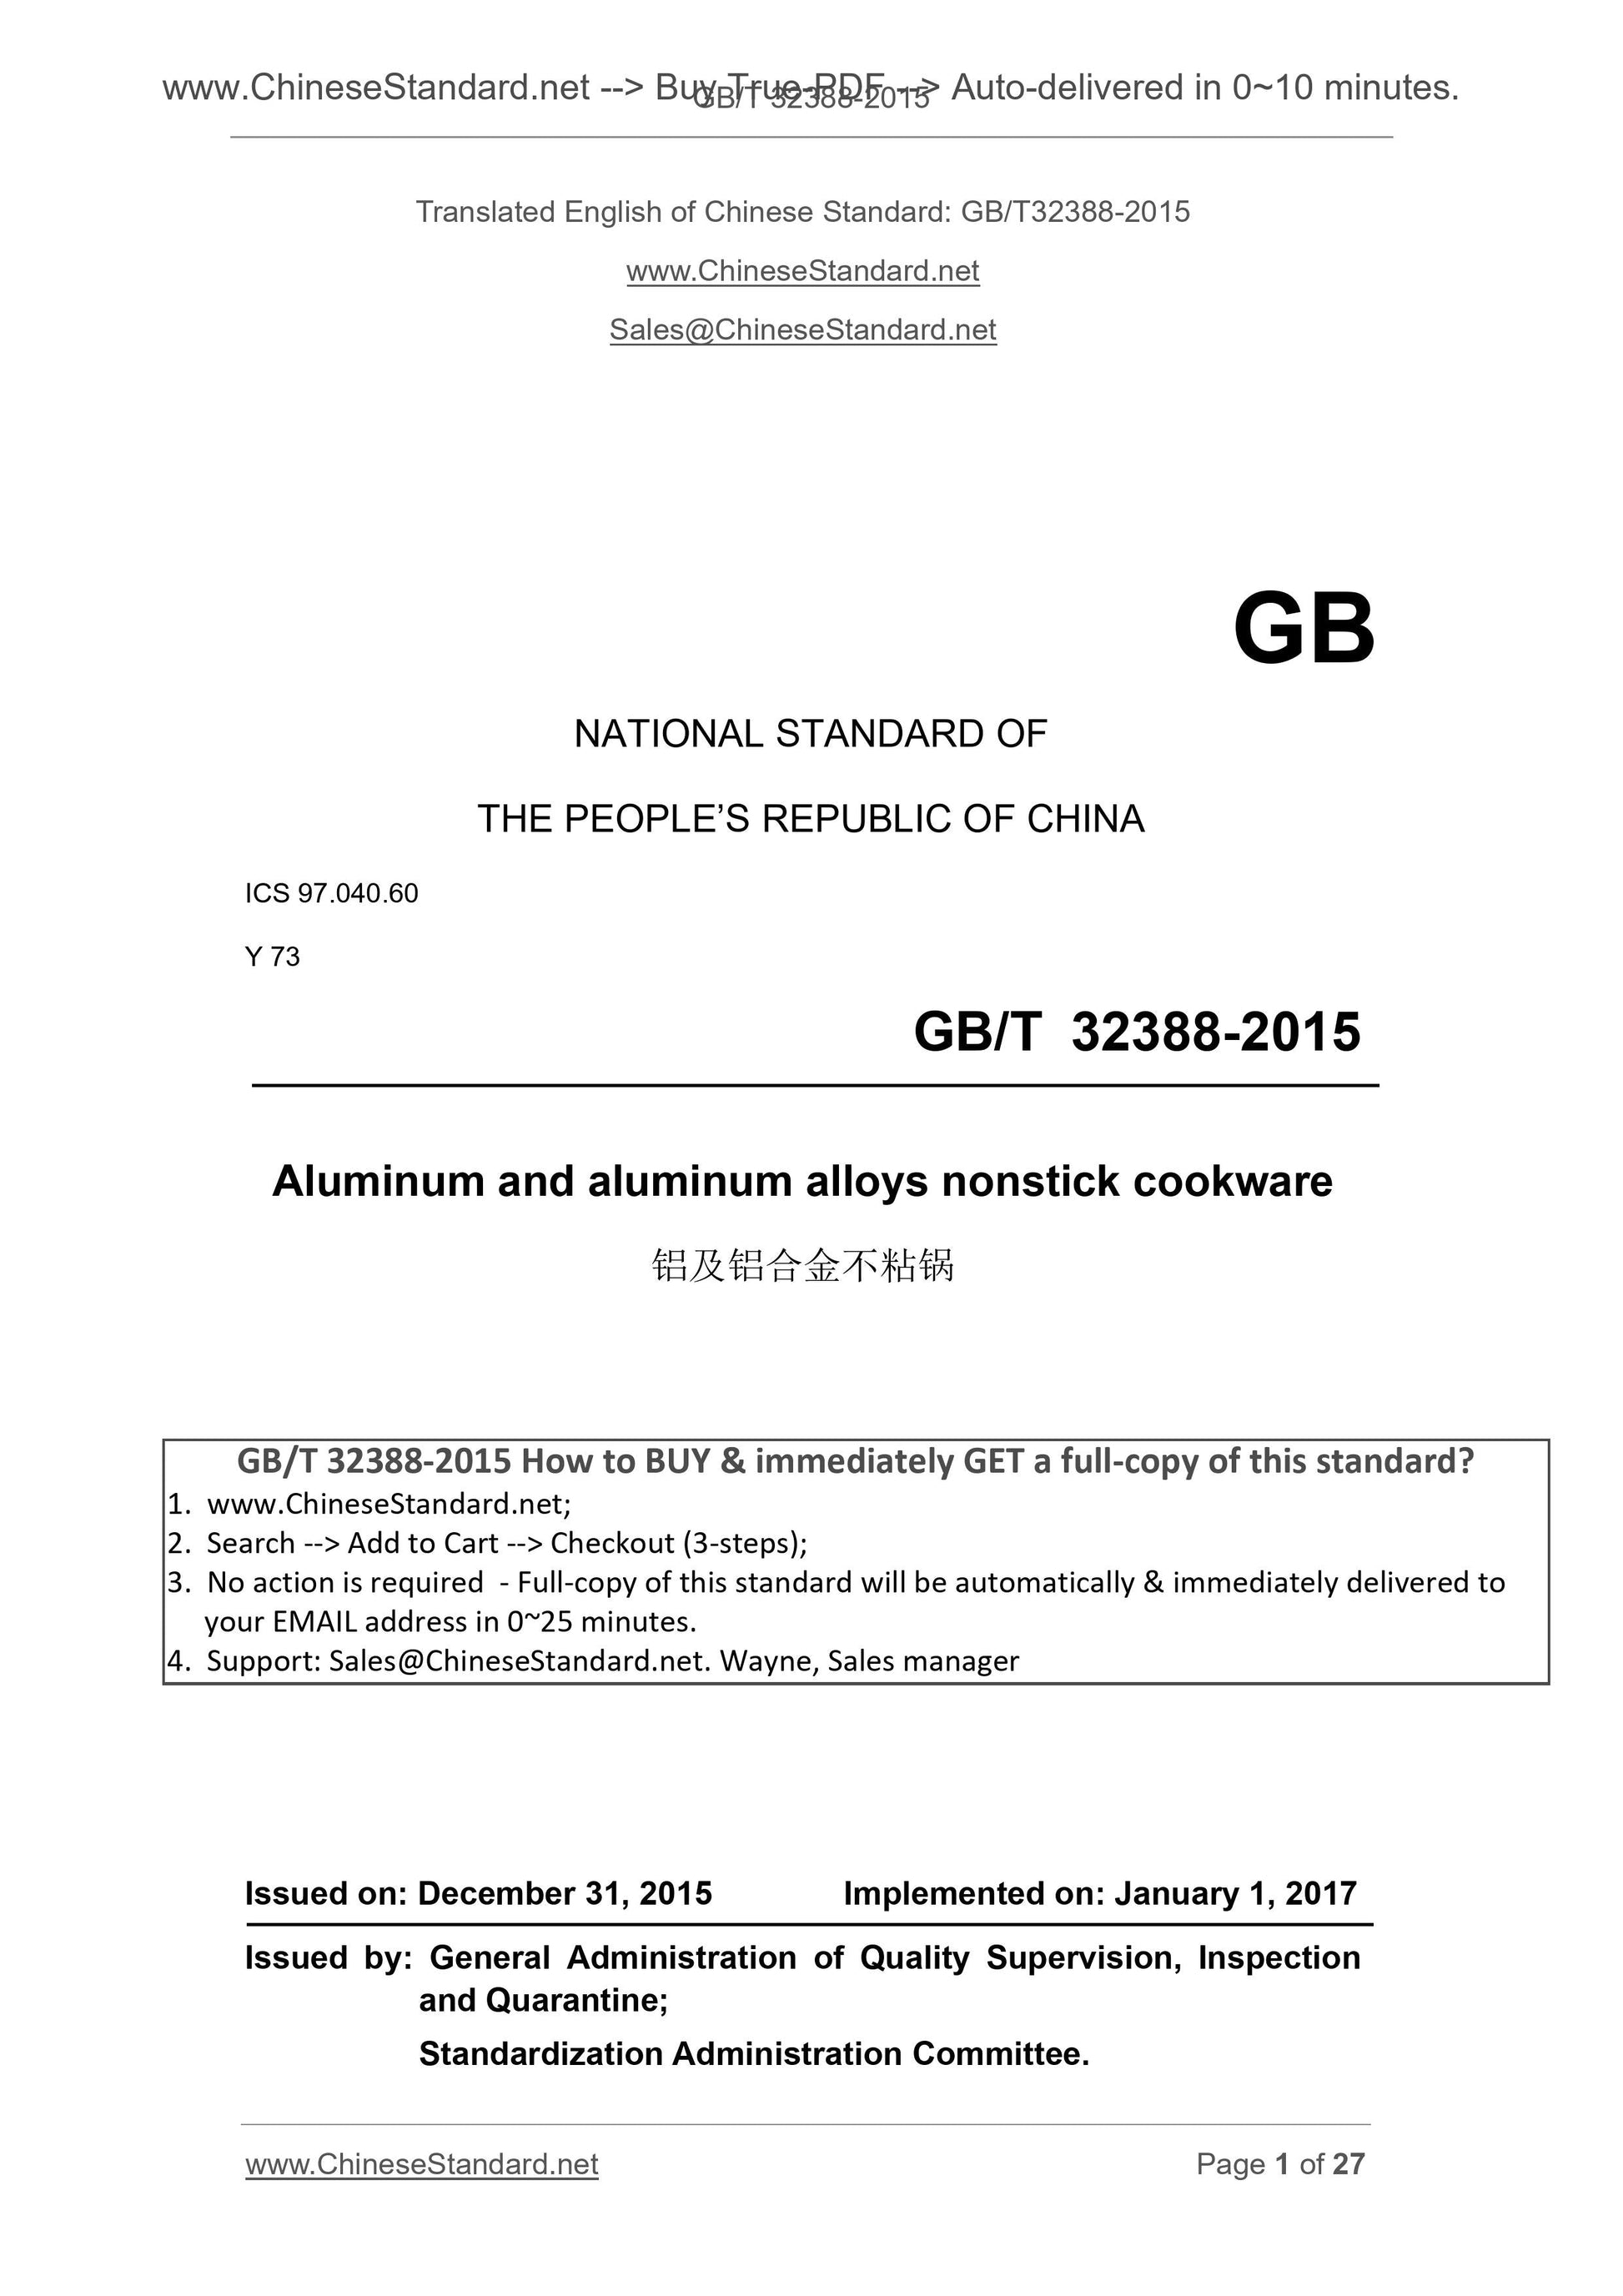 GB/T 32388-2015 Page 1